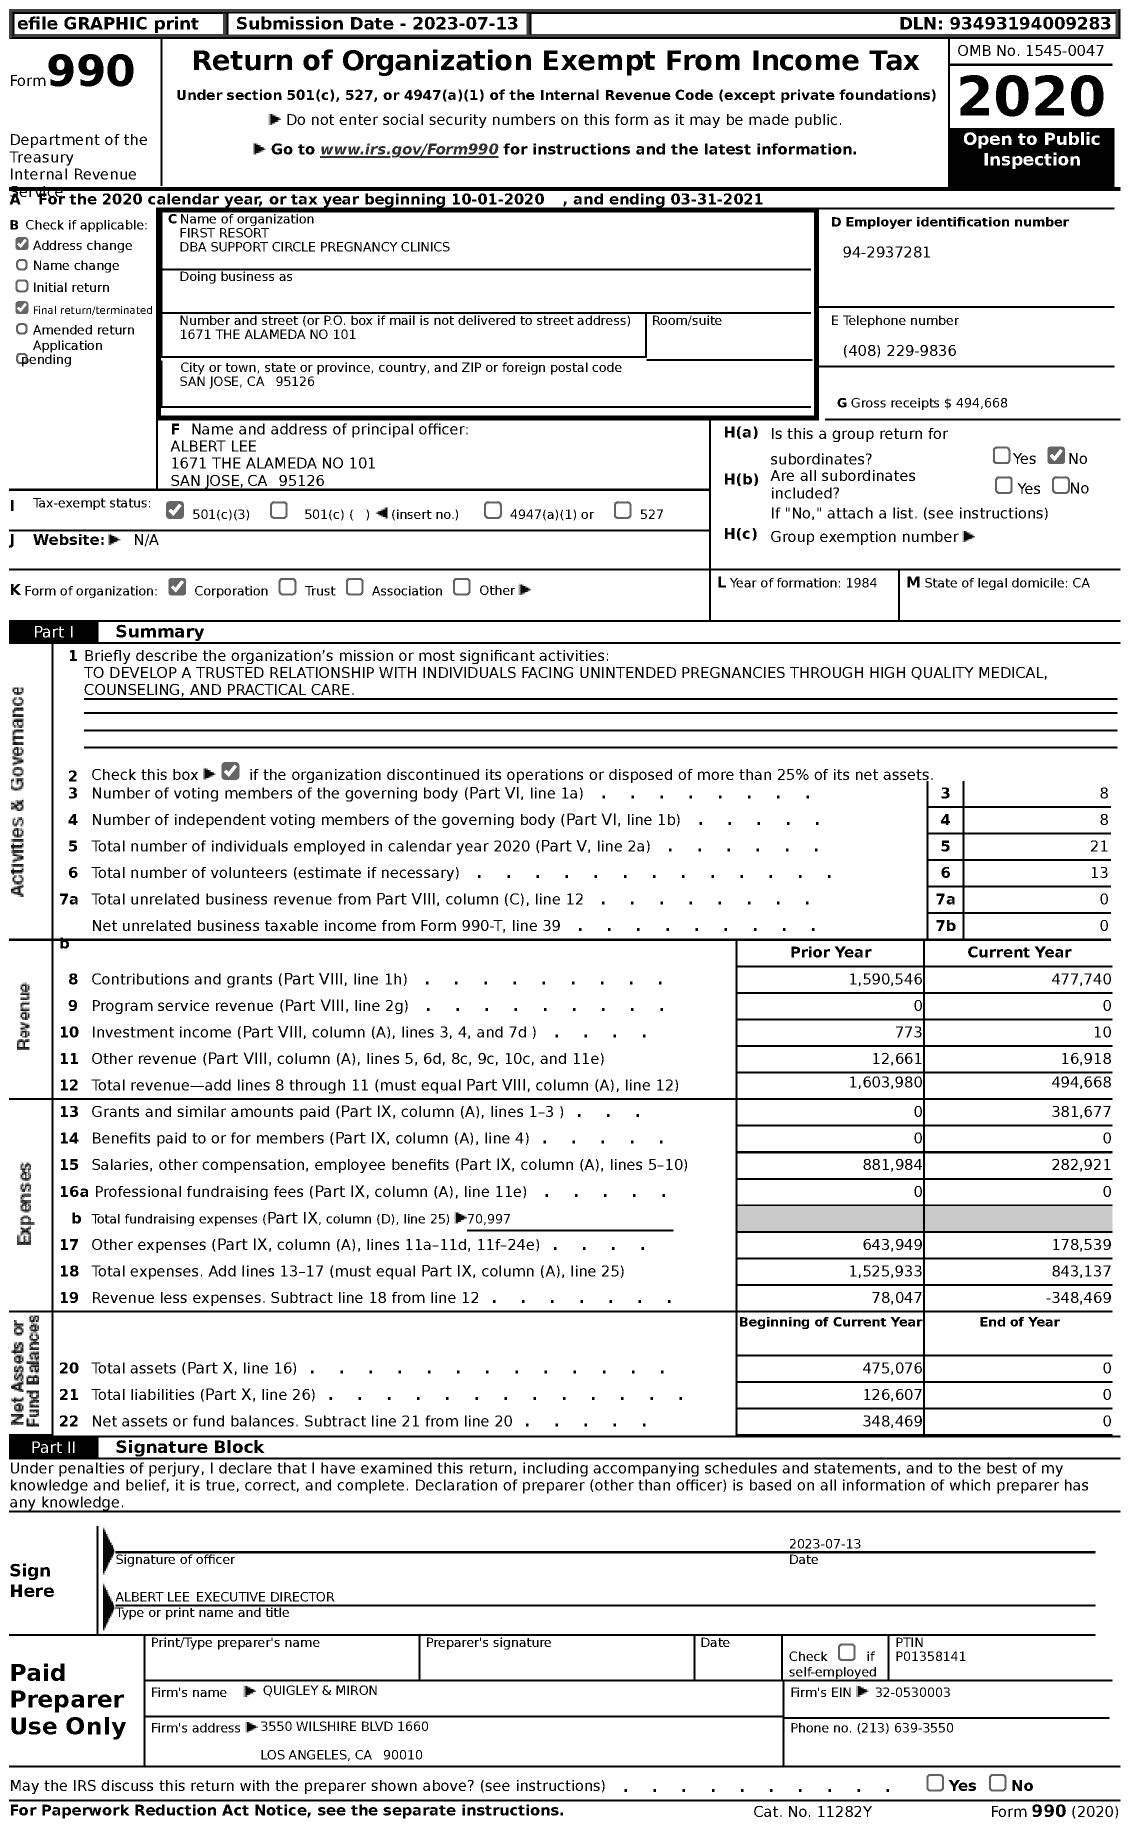 Image of first page of 2020 Form 990 for Support Circle Pregnancy Clinics